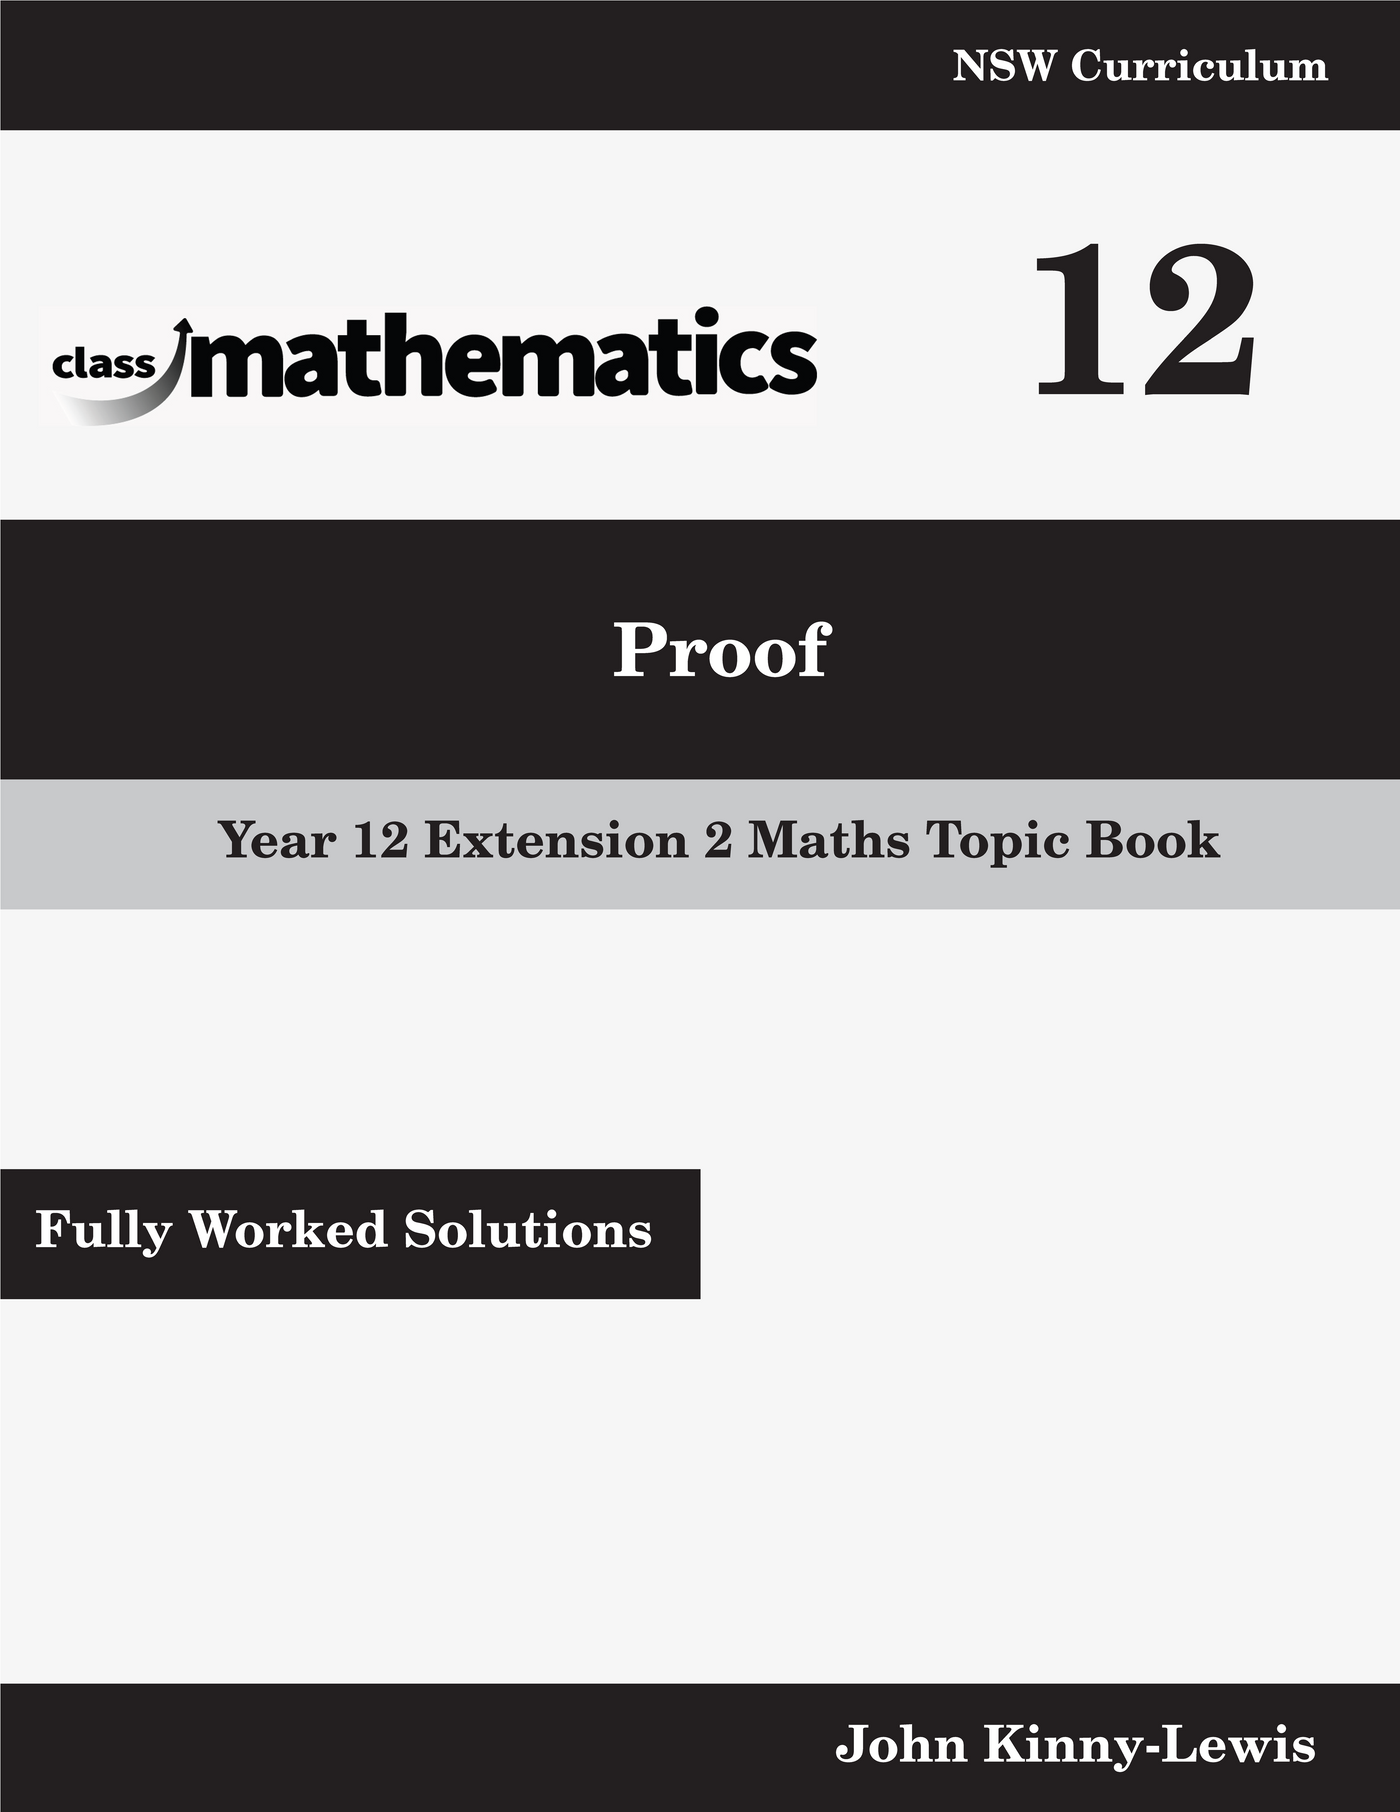 NSW Year 12 Maths Extension 2 - Proof